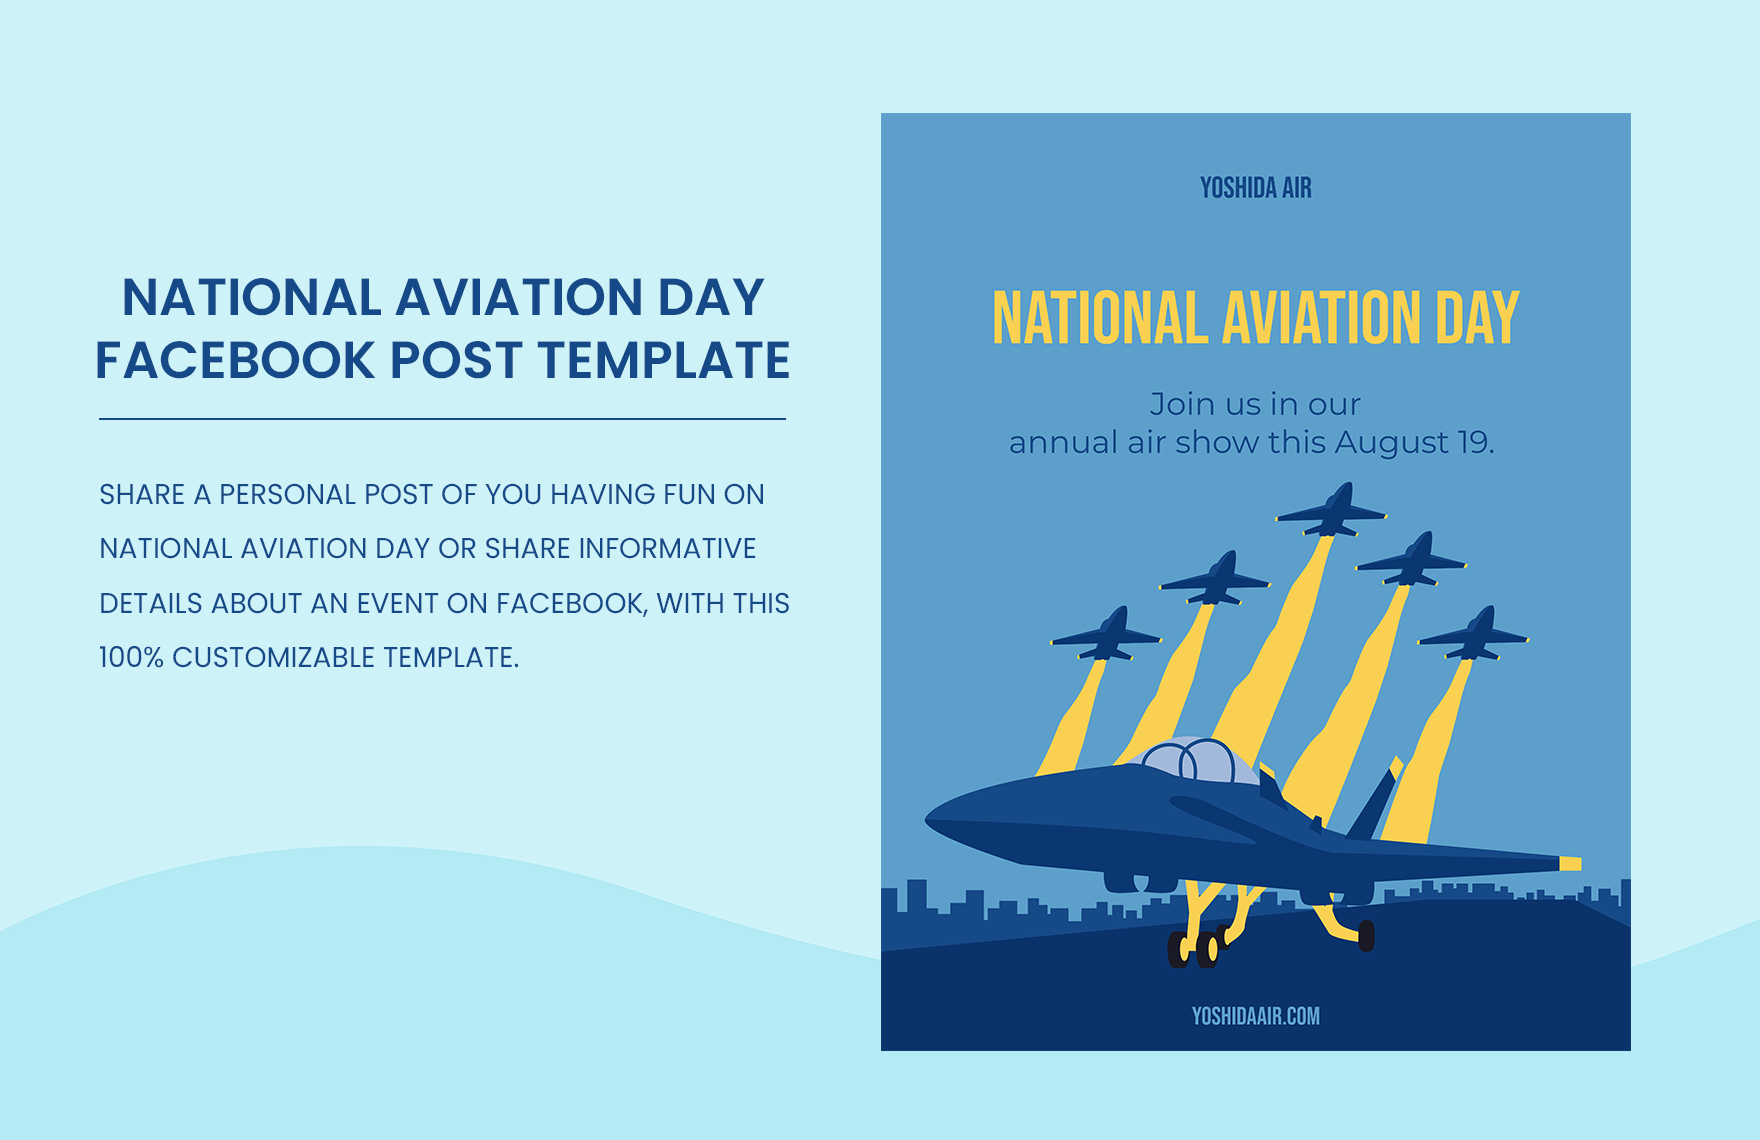 Free National Aviation Day Facebook Post Template in PDF, Illustrator, SVG, PNG